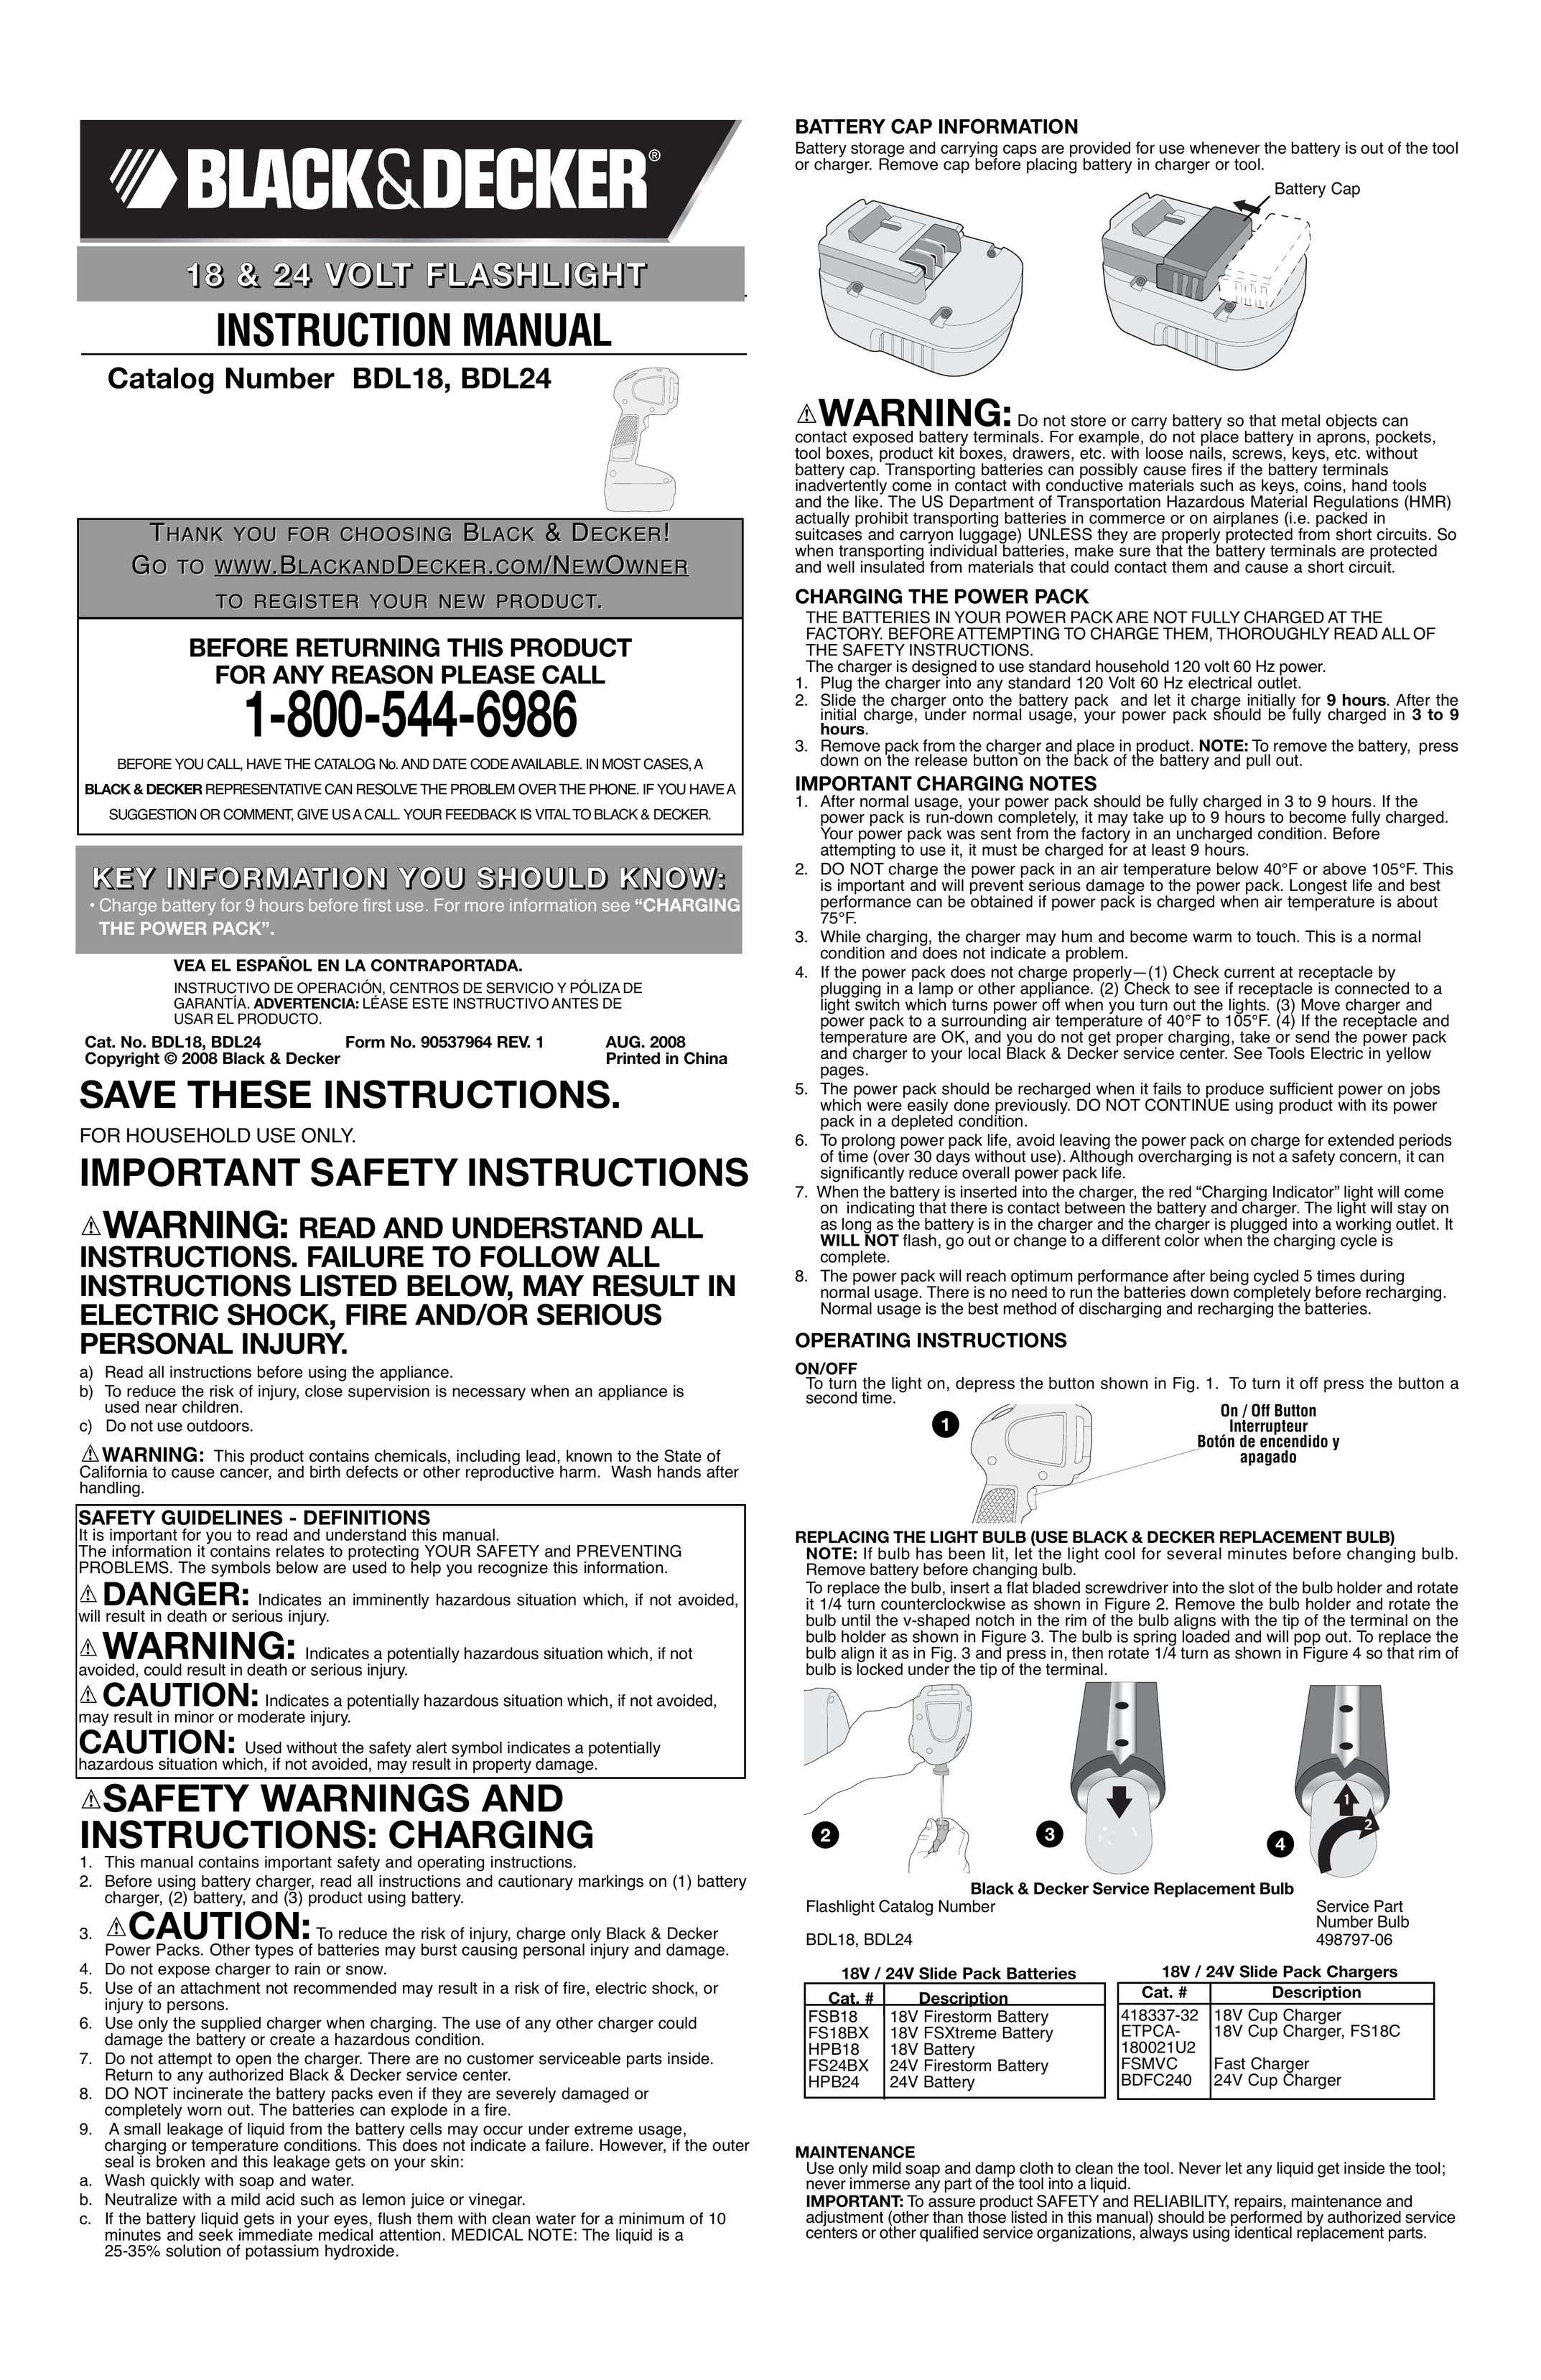 Black & Decker BDL18 Home Safety Product User Manual